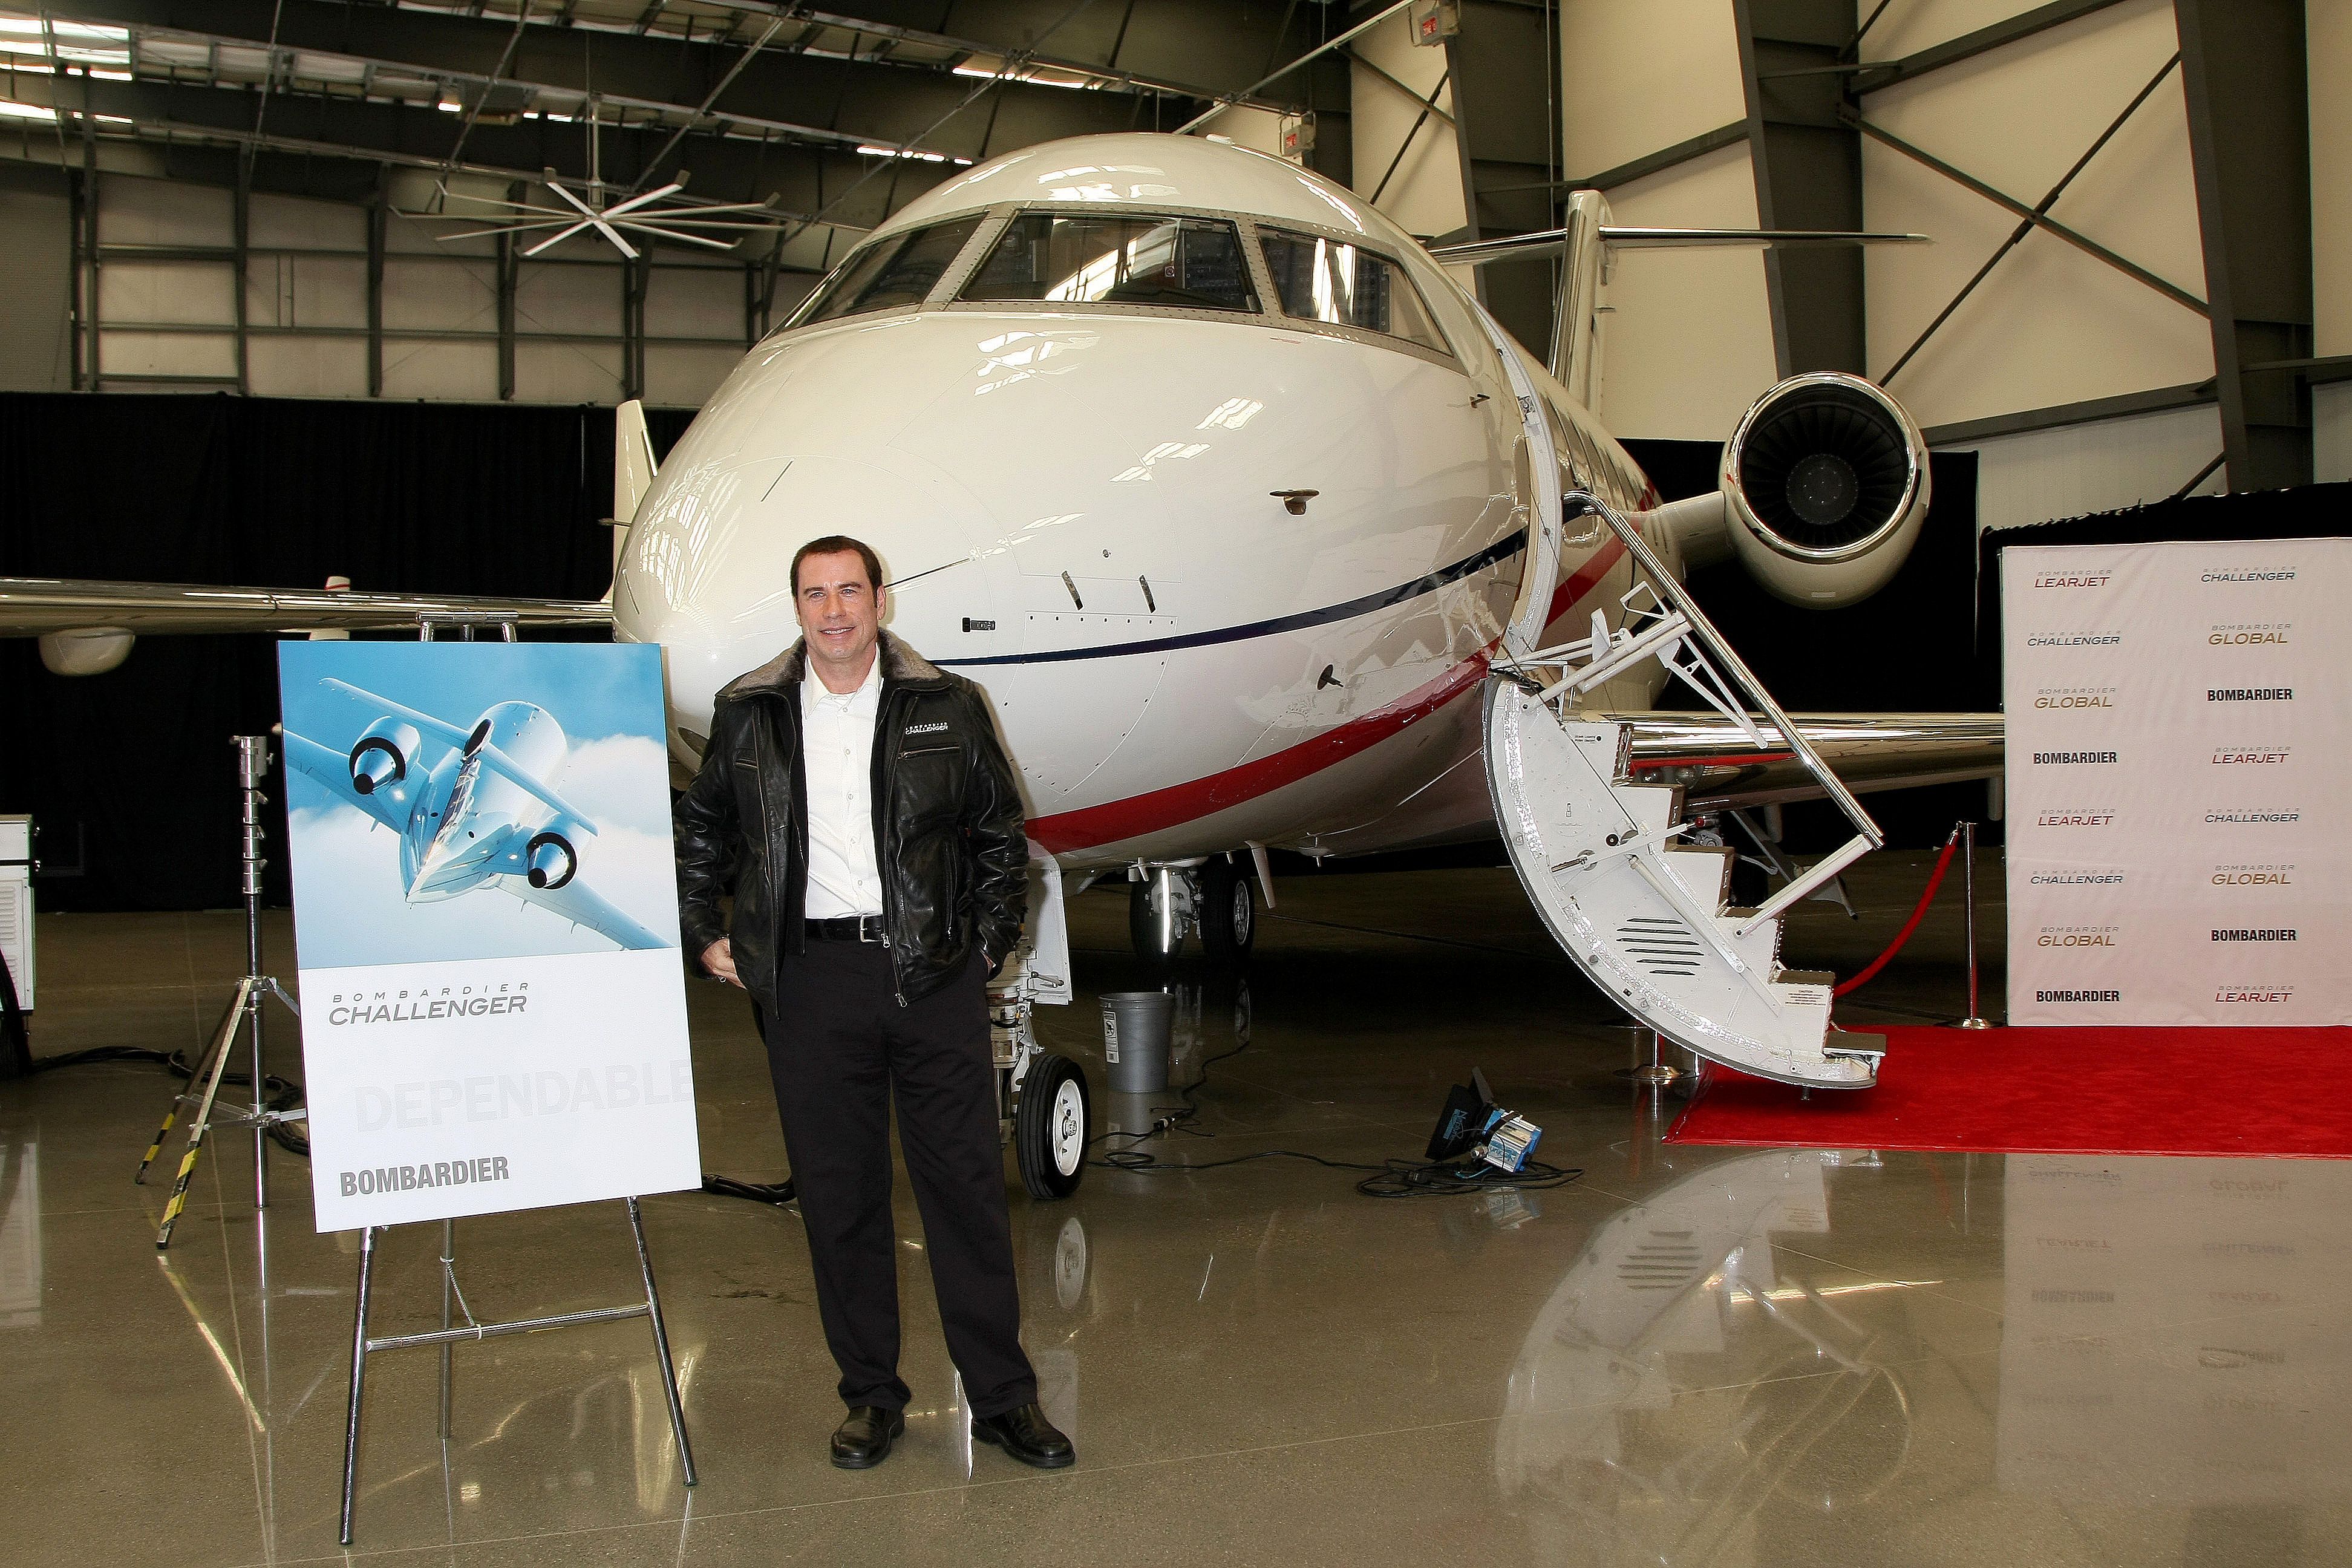 John Travolta with a Bombardier Challenger